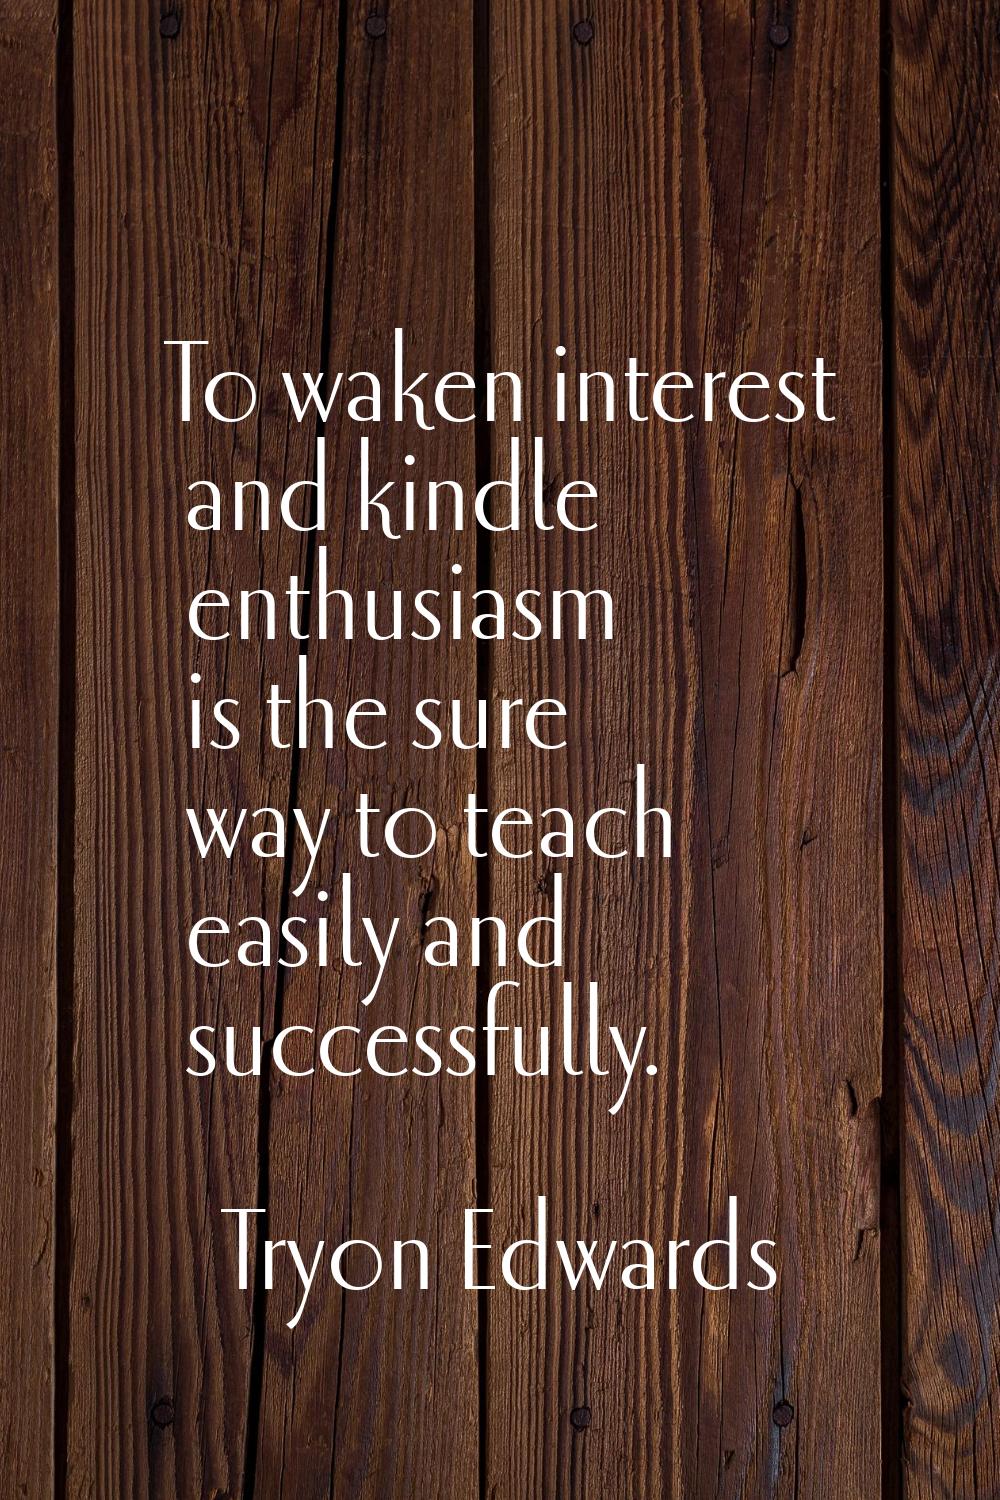 To waken interest and kindle enthusiasm is the sure way to teach easily and successfully.